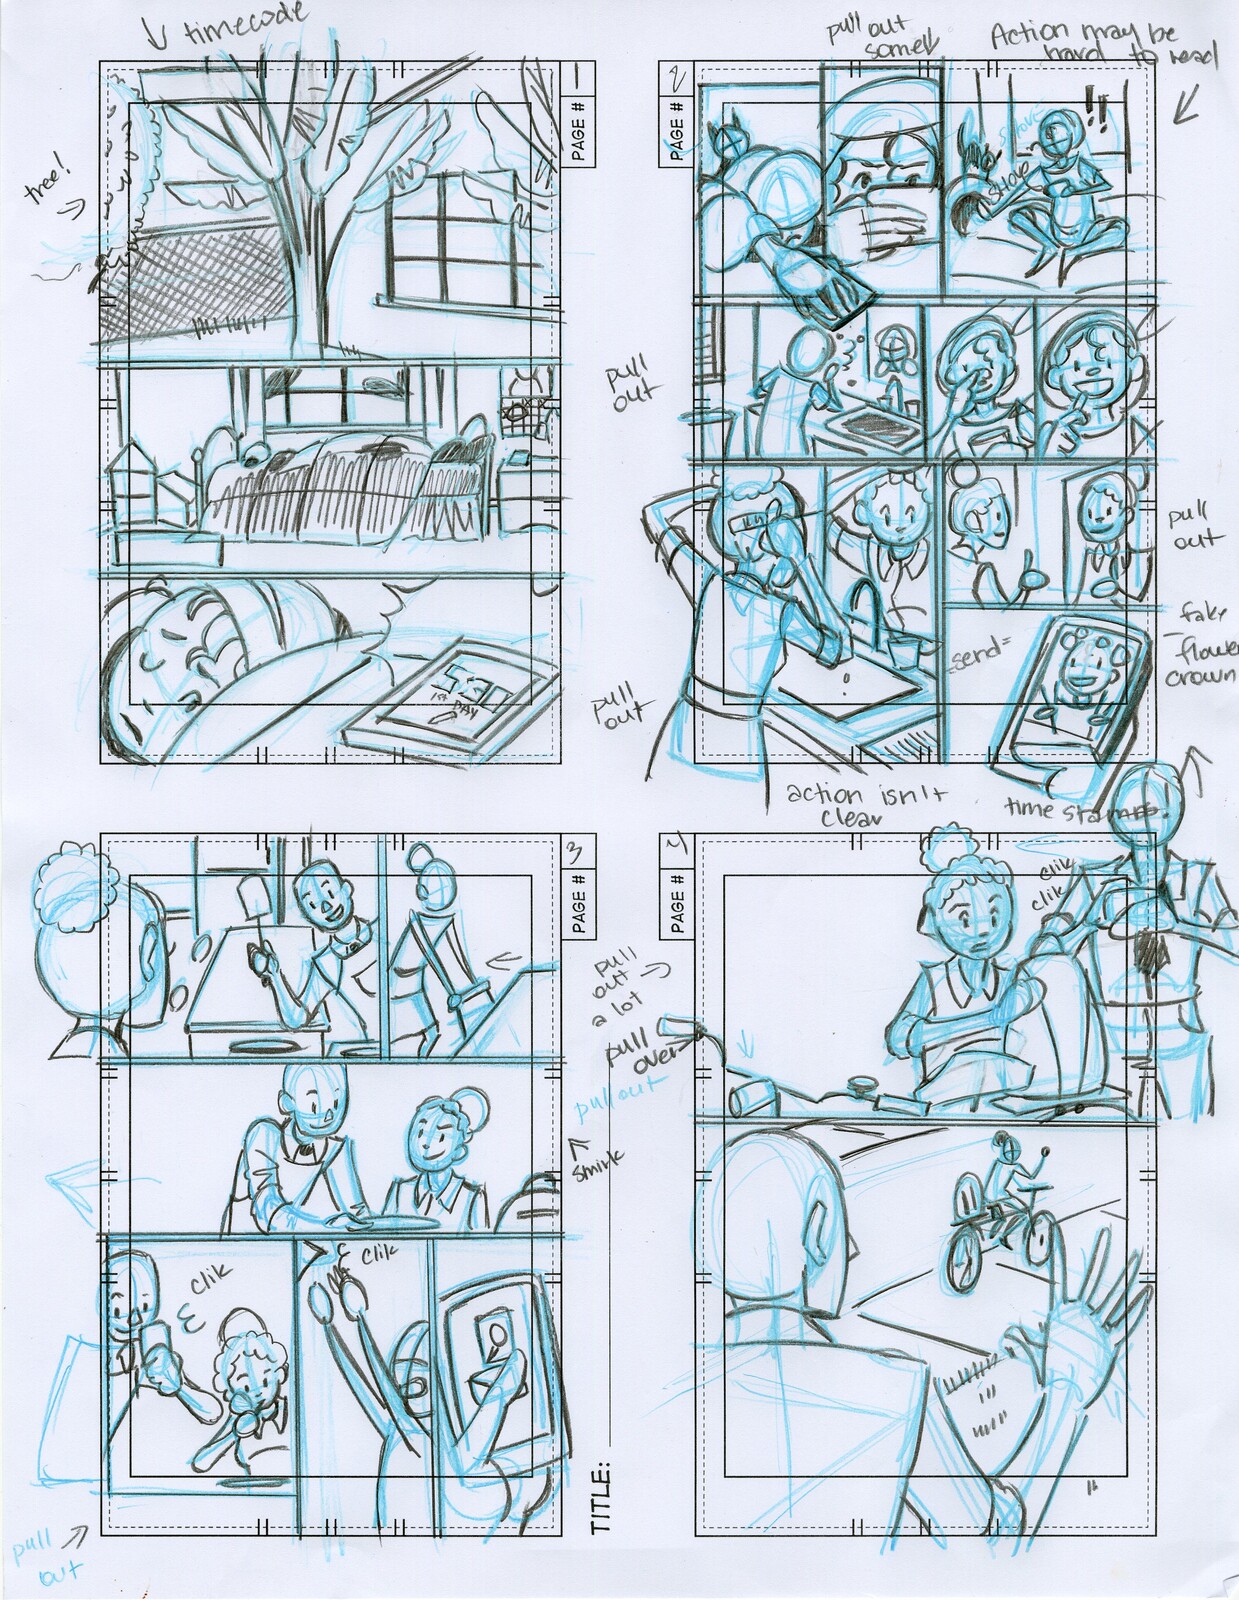 Thumbnails for pages 4-5.